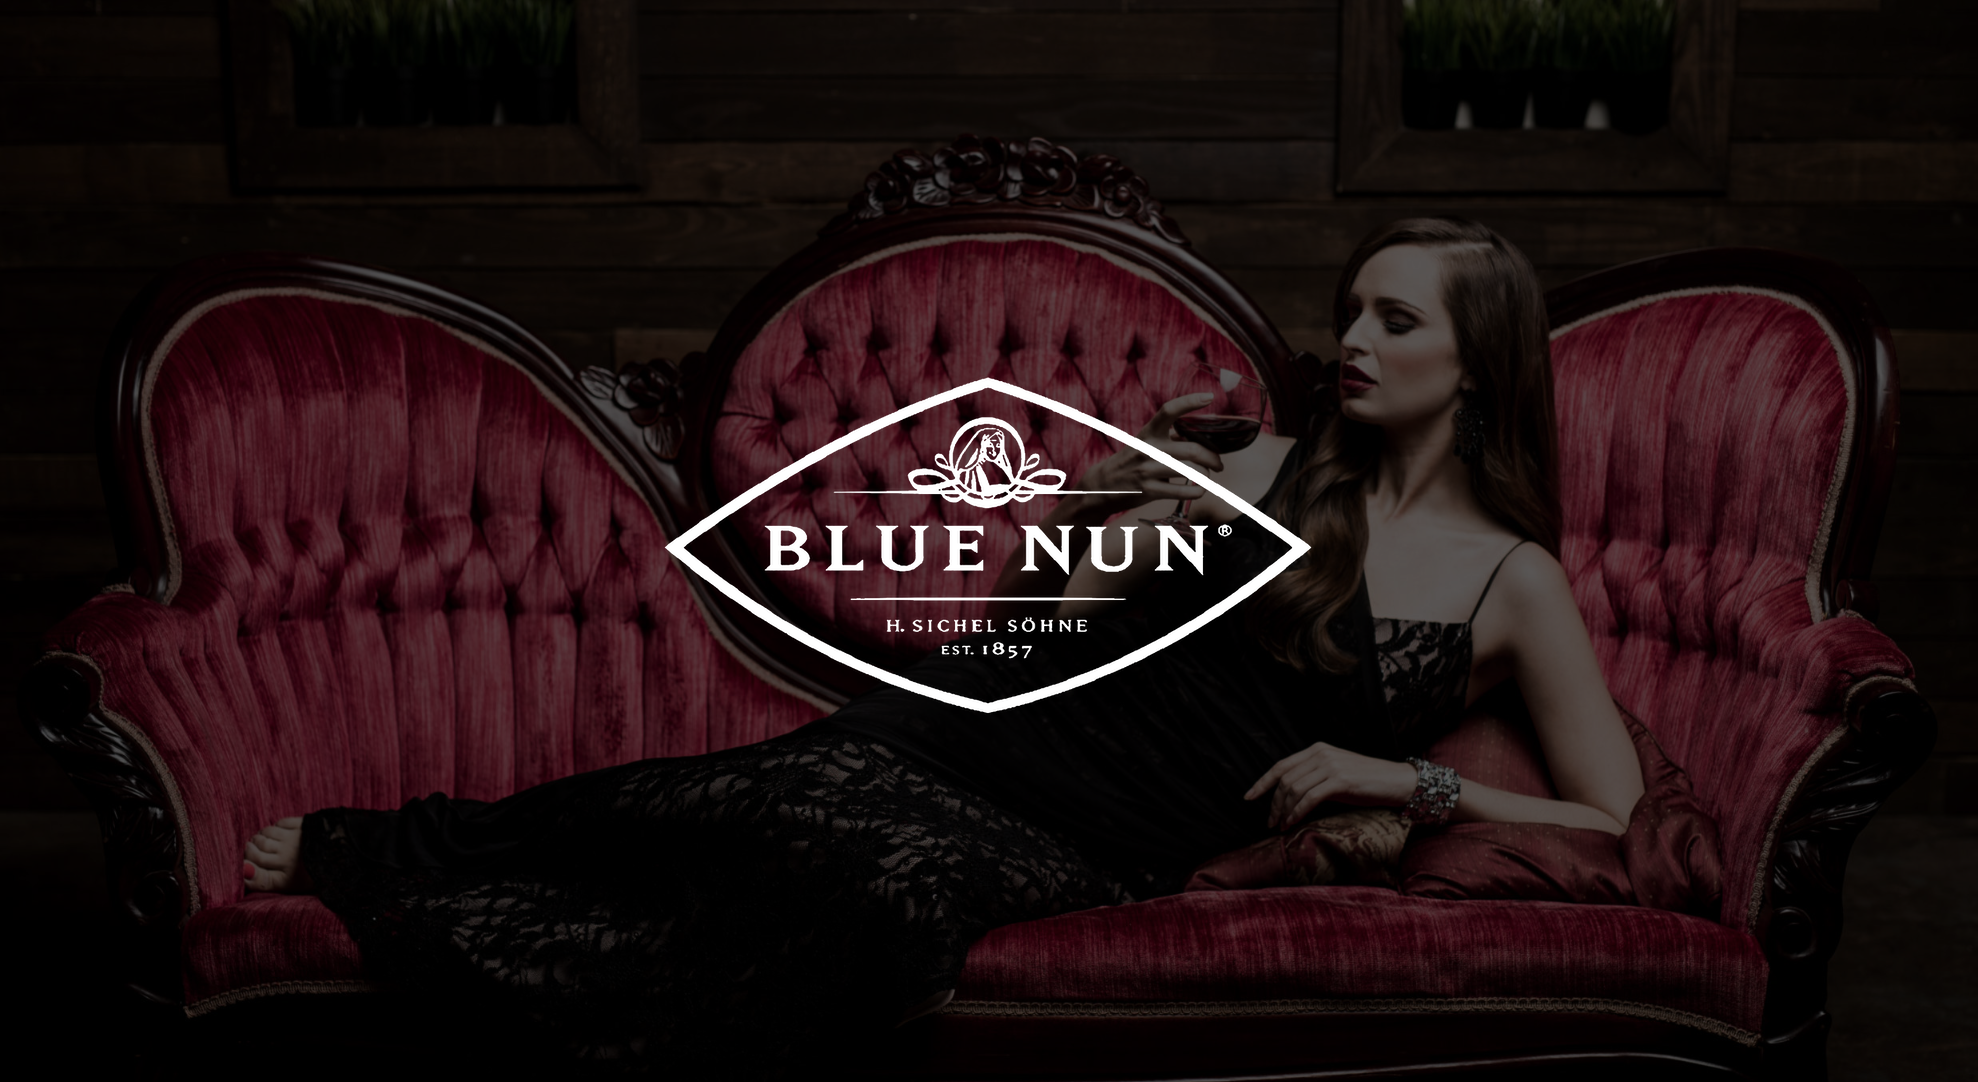 White Blue Nun logo with dimmed background of woman laying on a vintage red couch holding a glass of wine posing for the camera